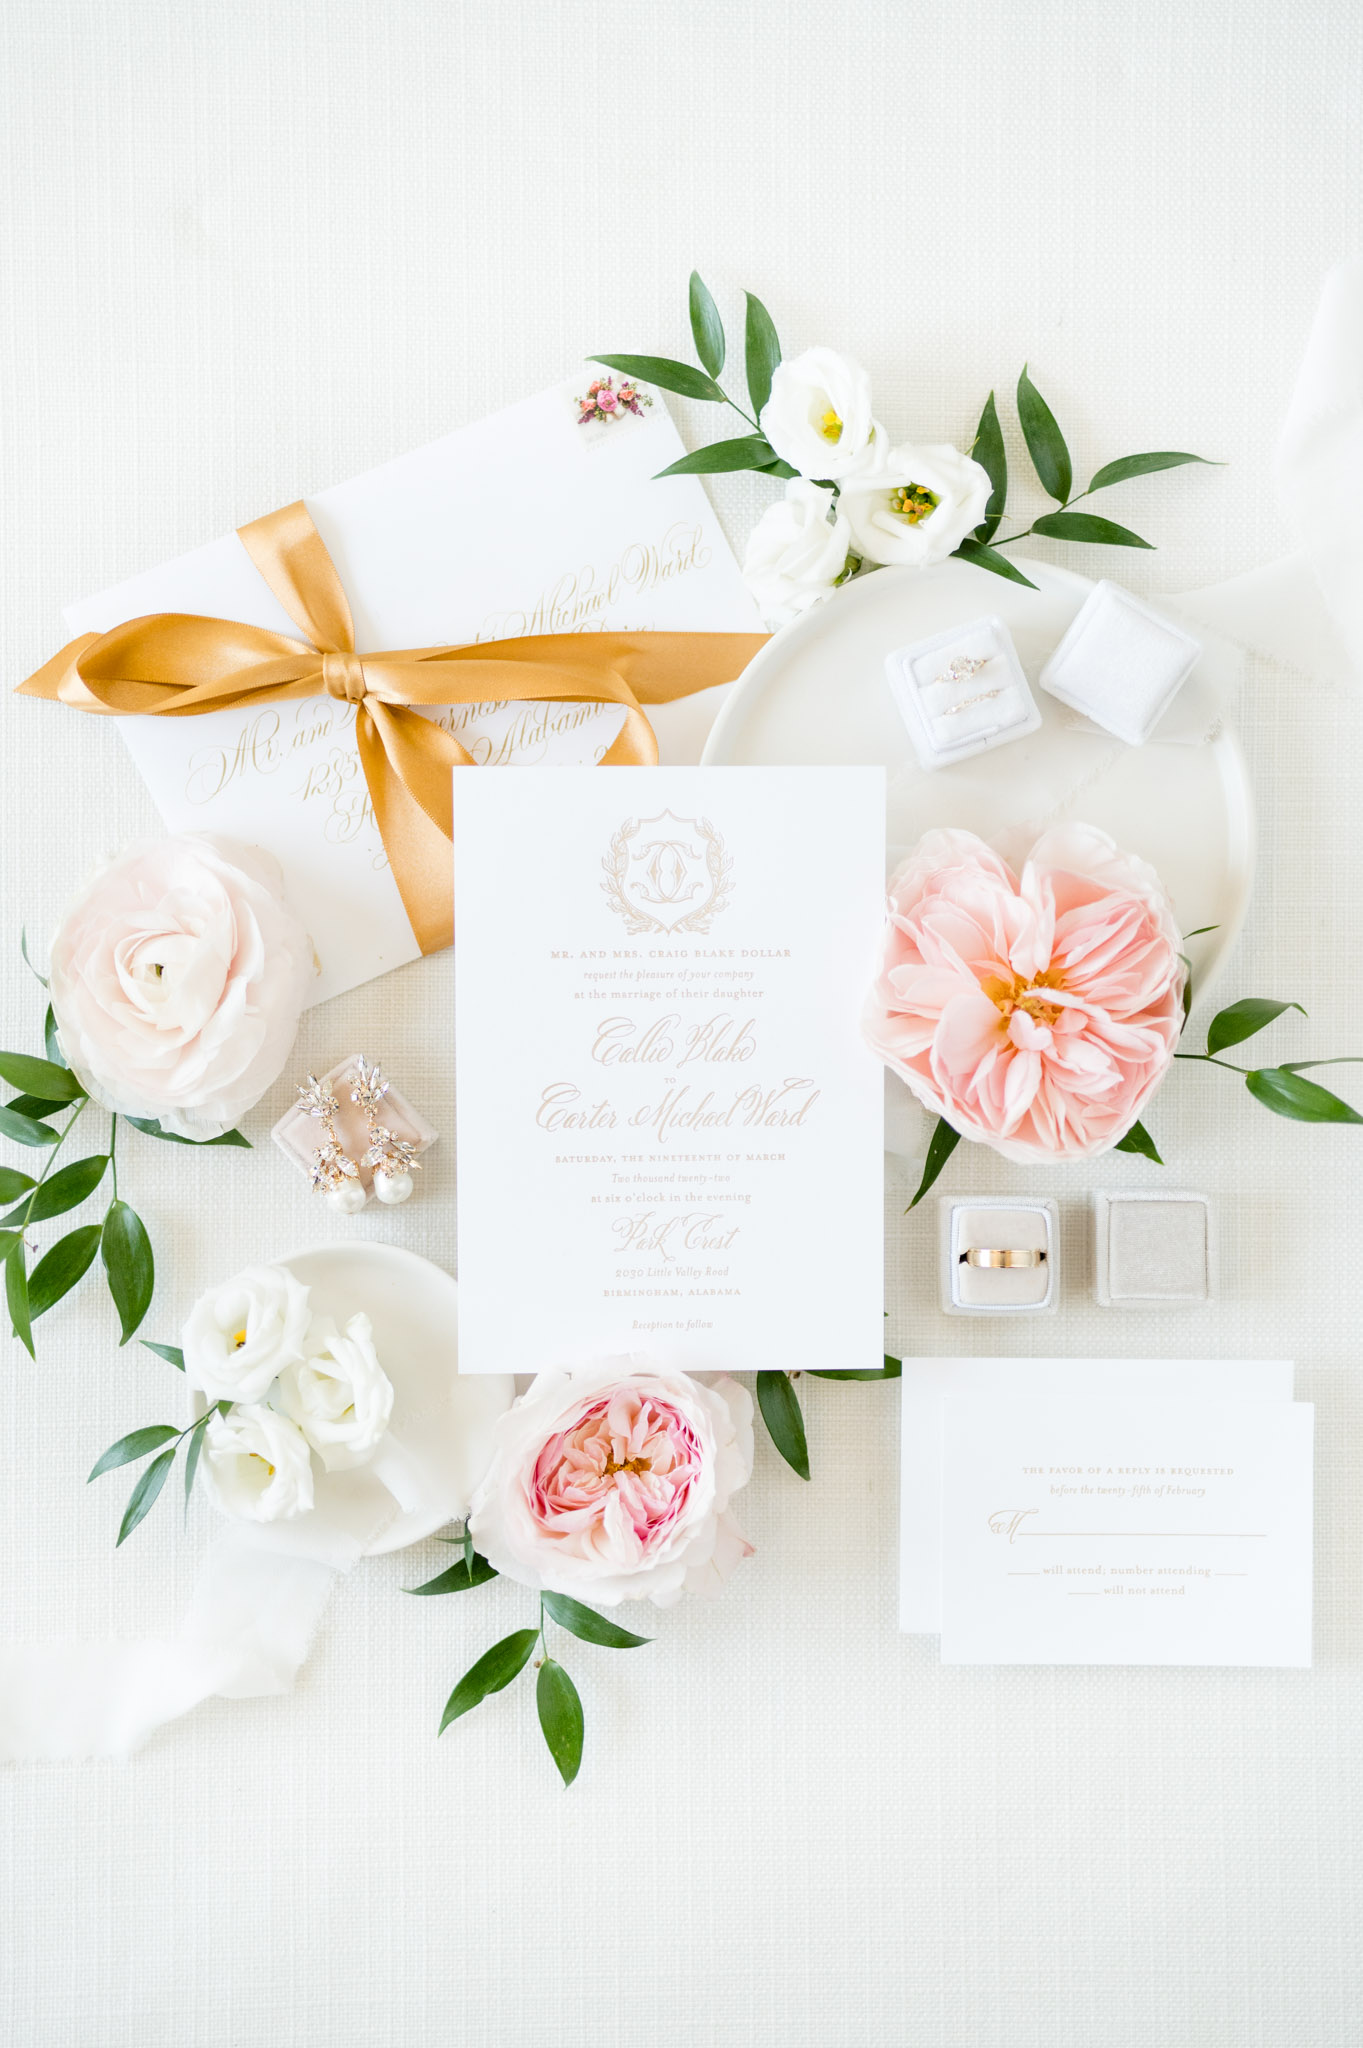 White wedding invitation and pink flowers.